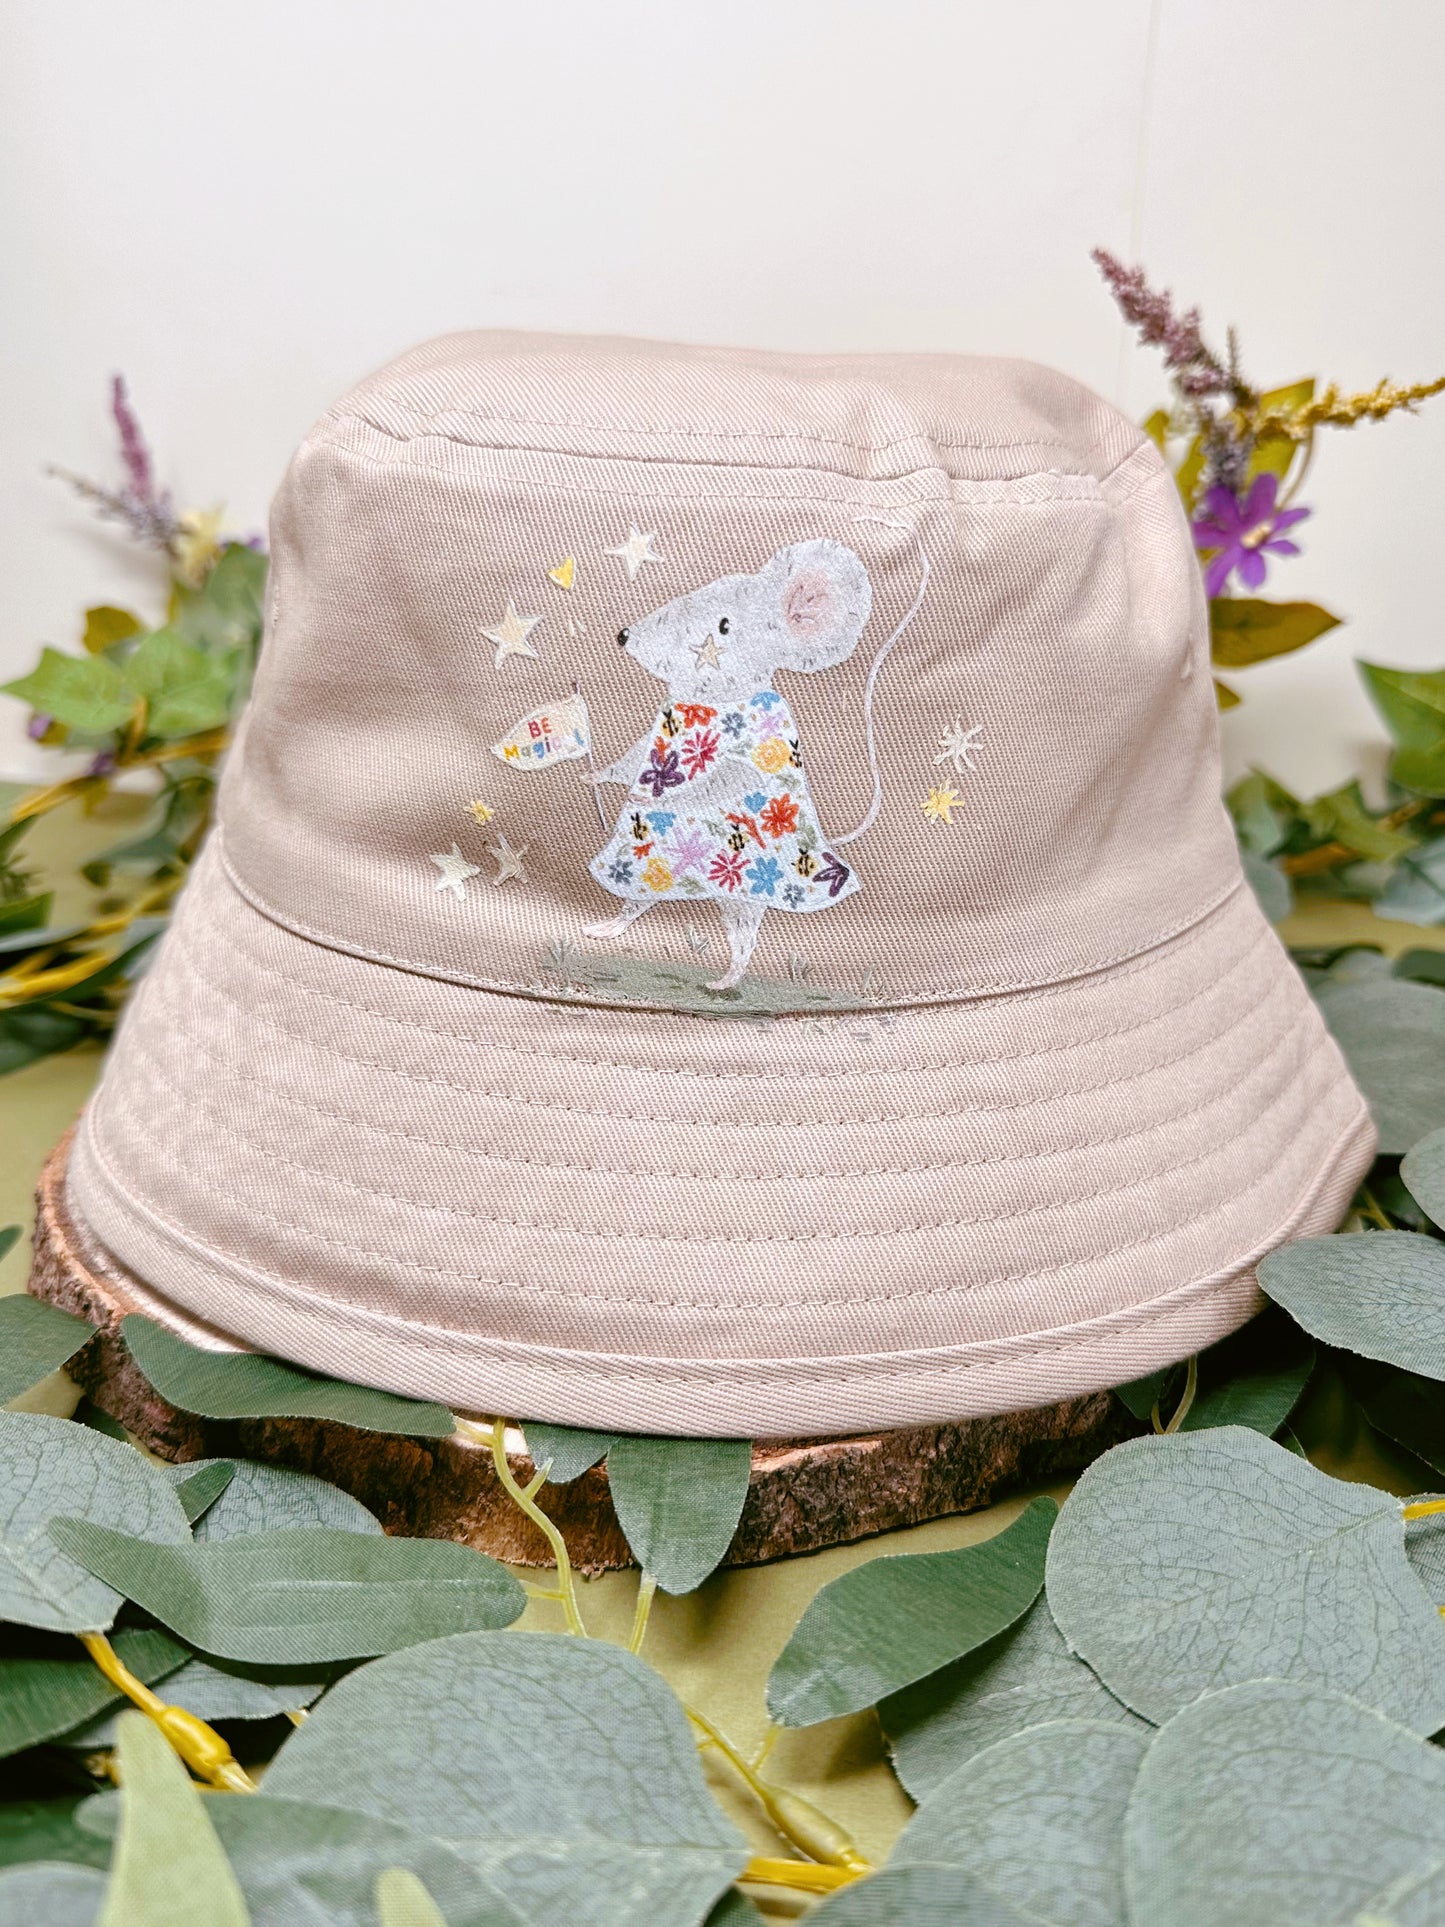 Magical Mouse Bucket Hat - Child